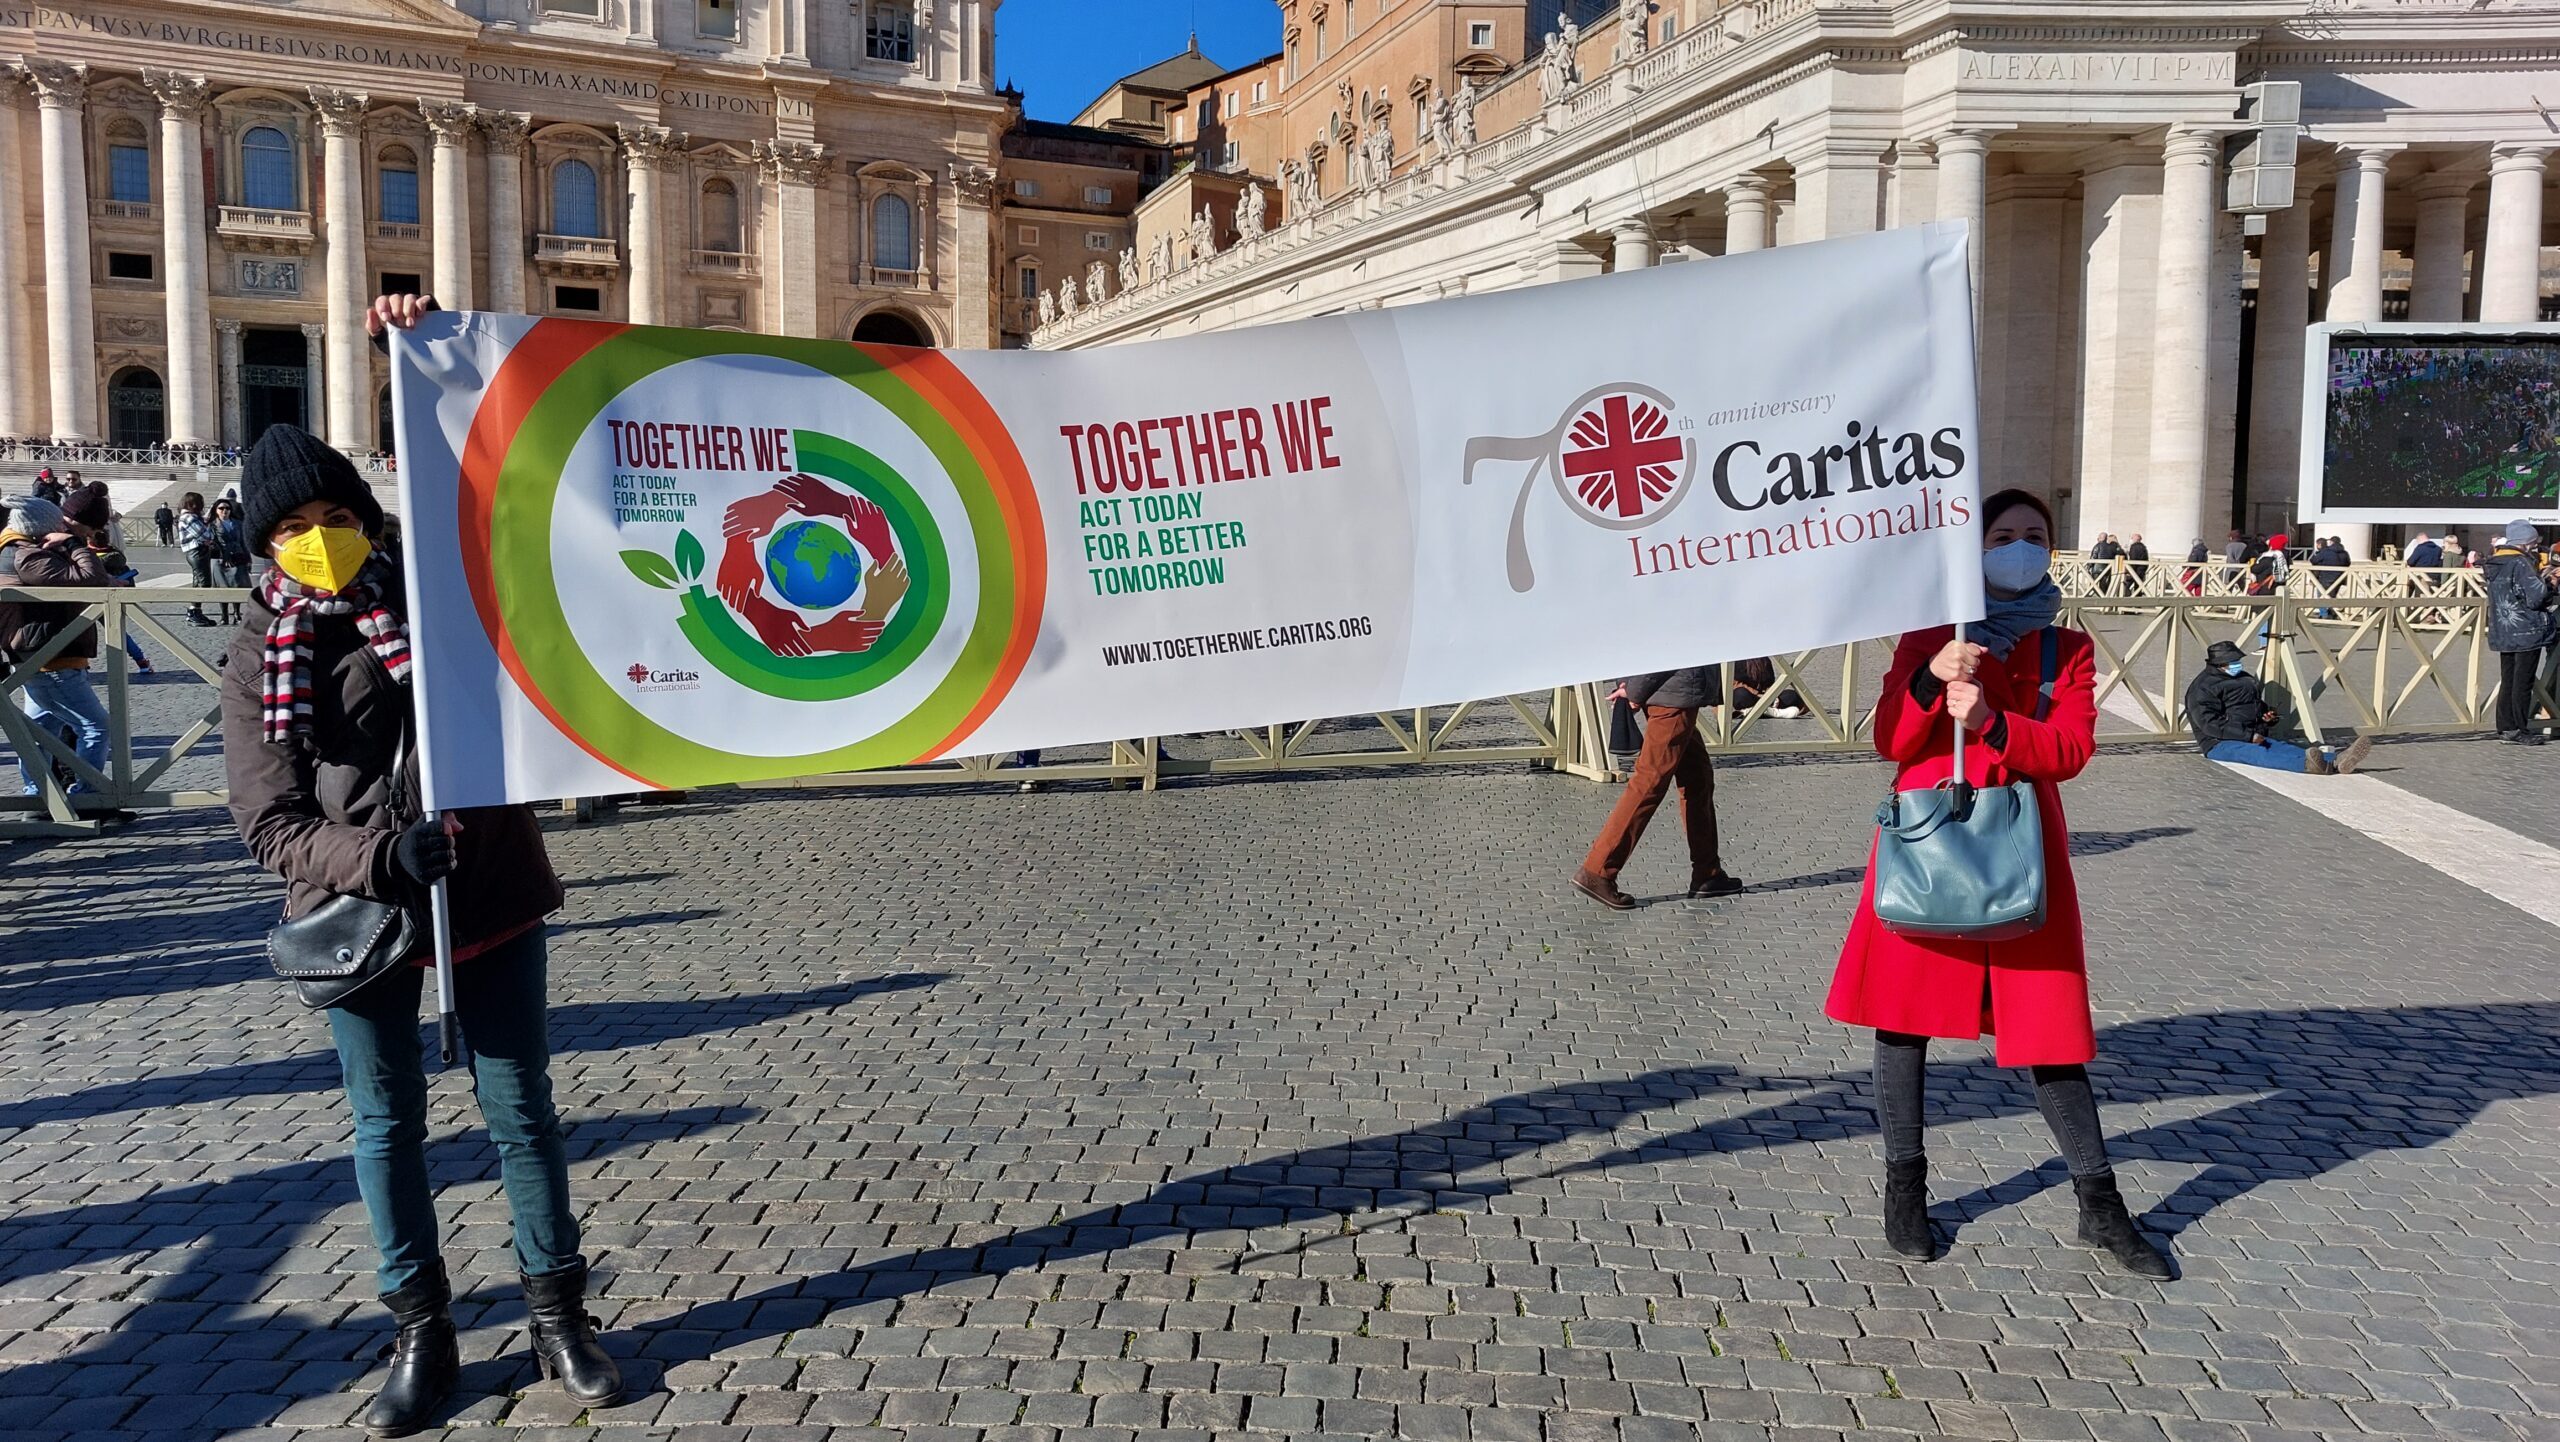 “Laudate Deum”, New Inspiration for Caritas Work on Climate Change